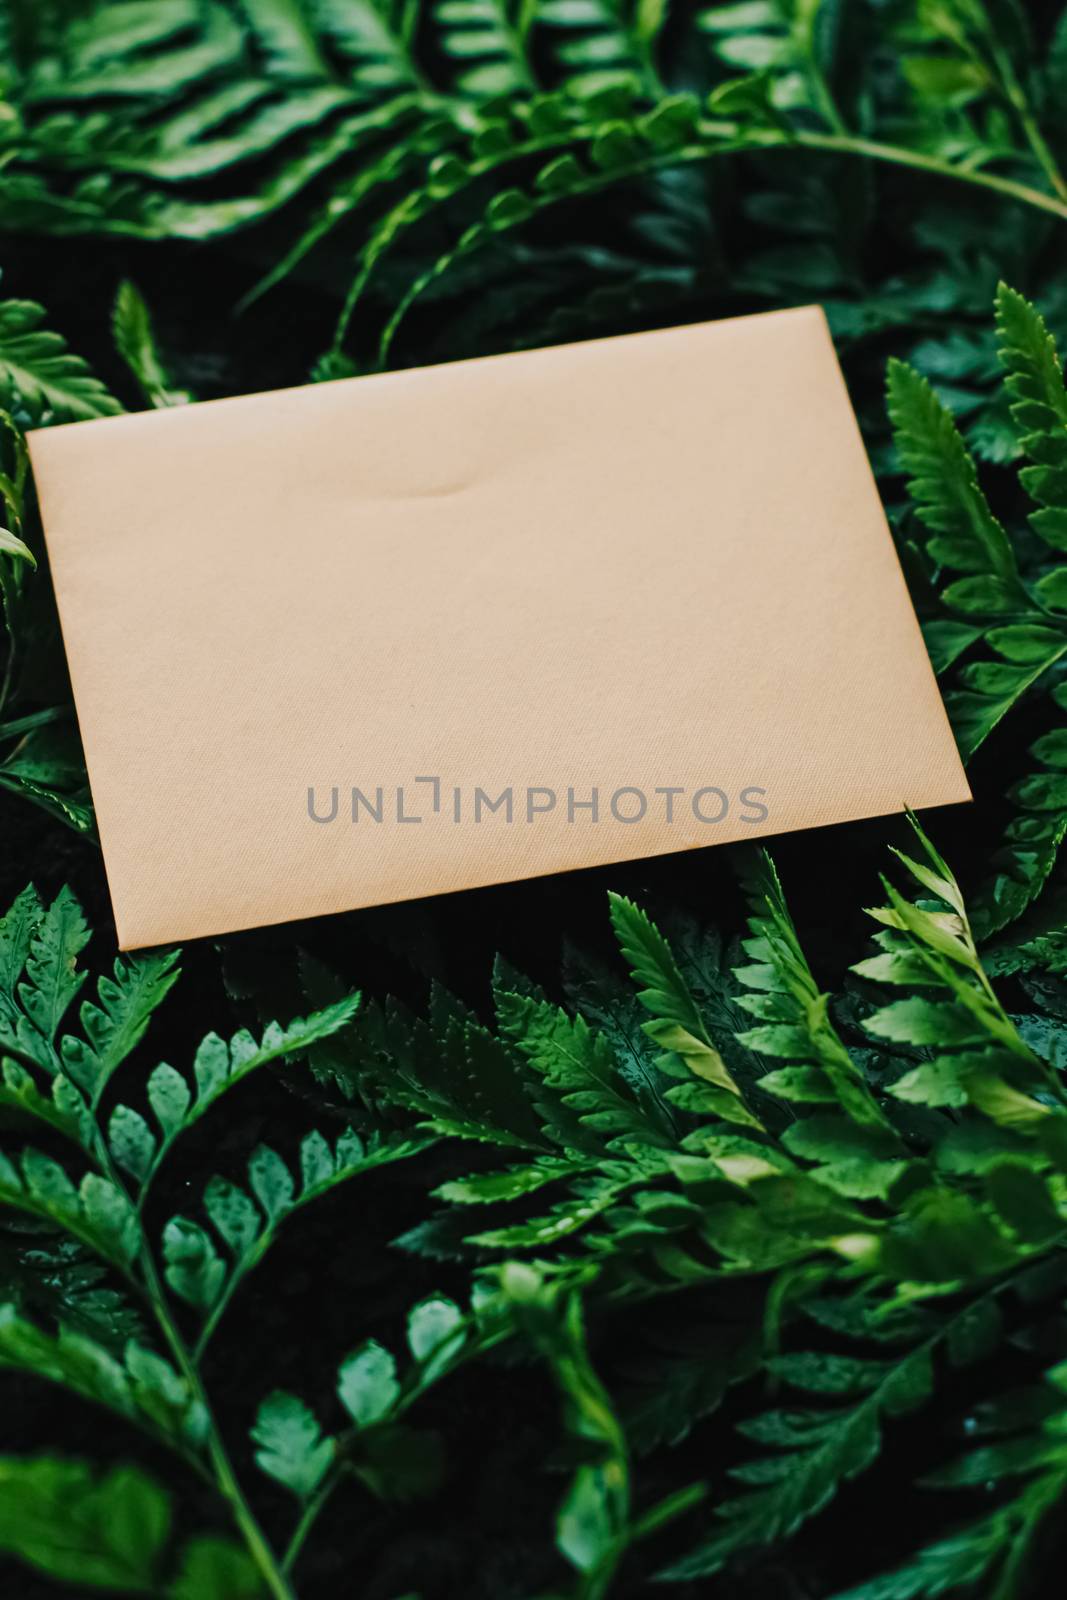 Blank envelope and green leaves in nature, paper card as background, correspondence and newsletter concept